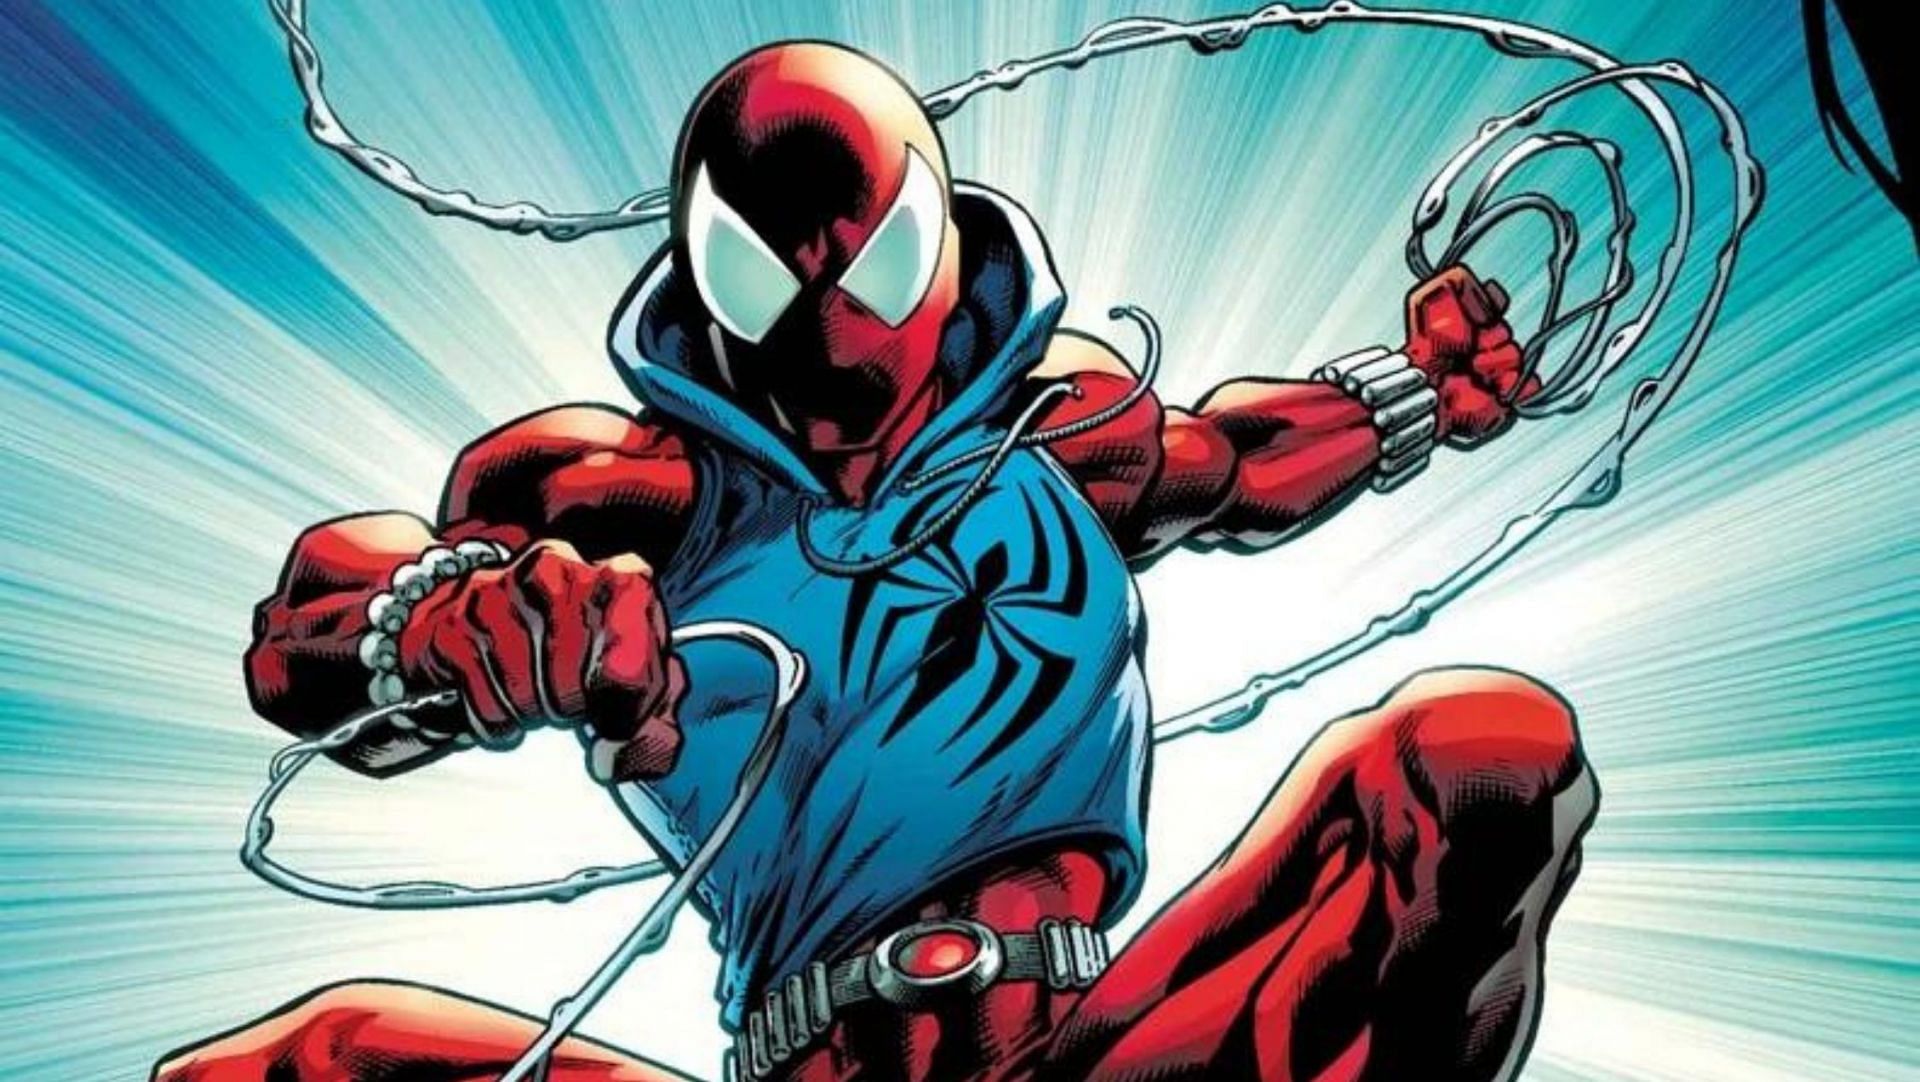 As the clone of Peter Parker, Ben Reilly dons his own suit and takes up the mantle of hero (Image via Marvel Comics)